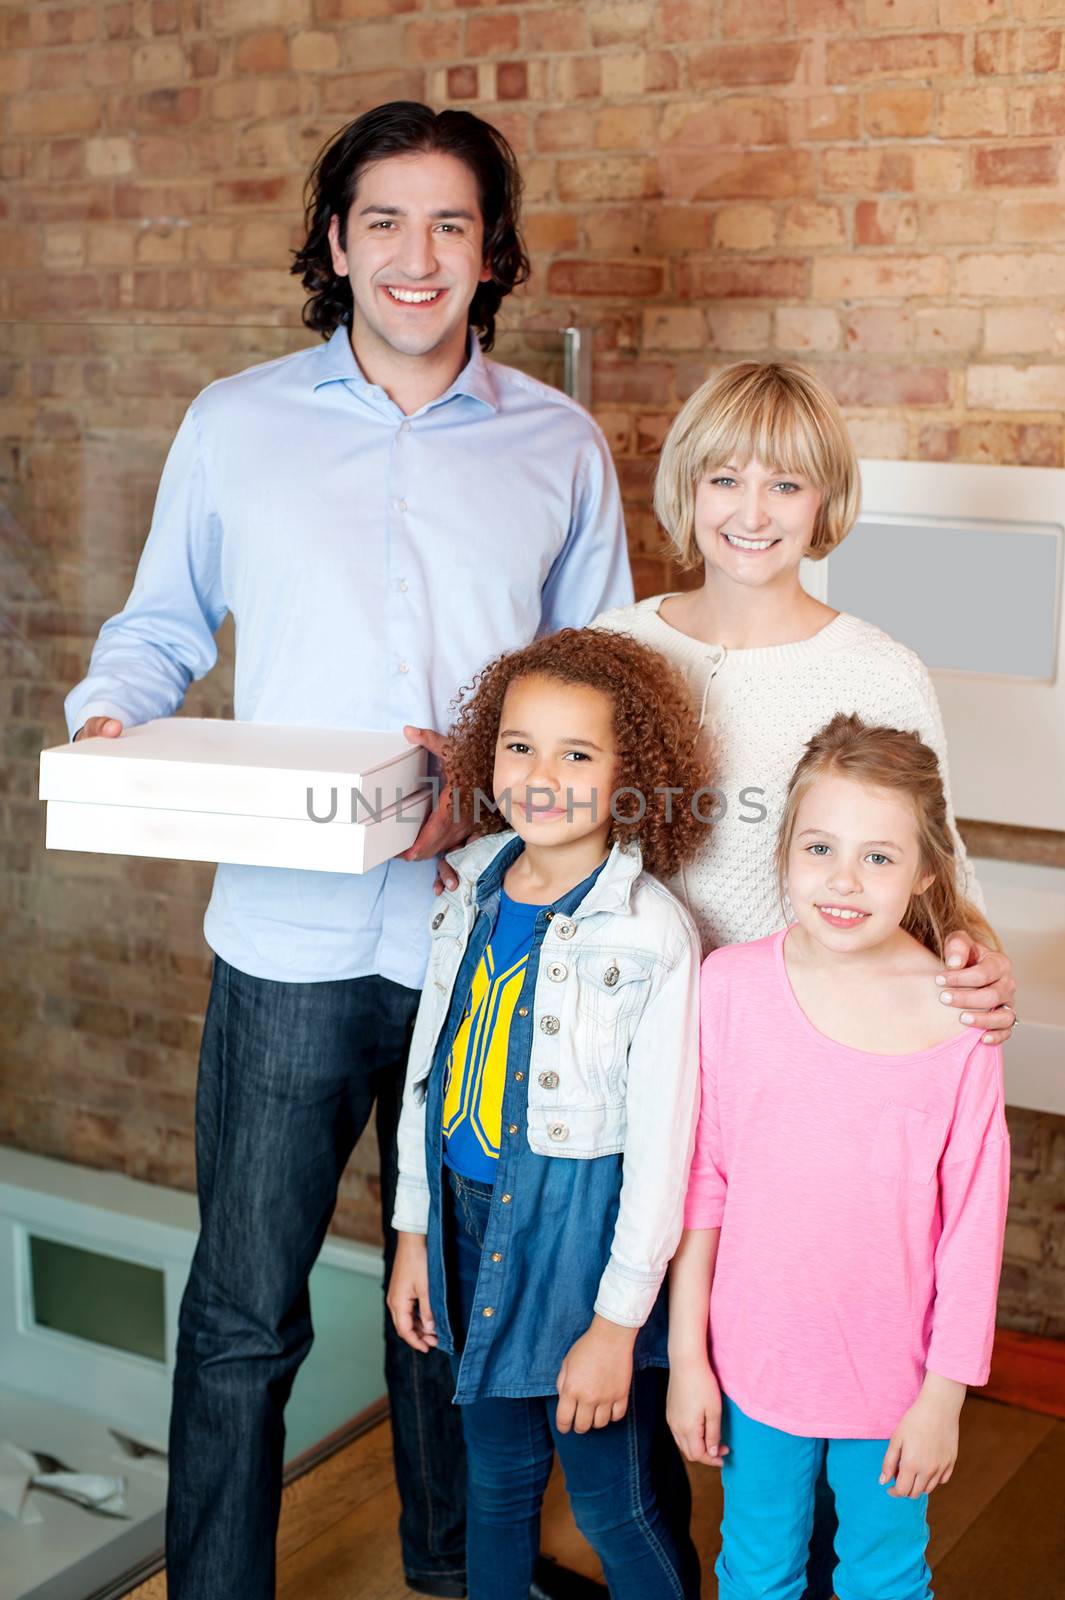 Young man with his family holding pizza boxes